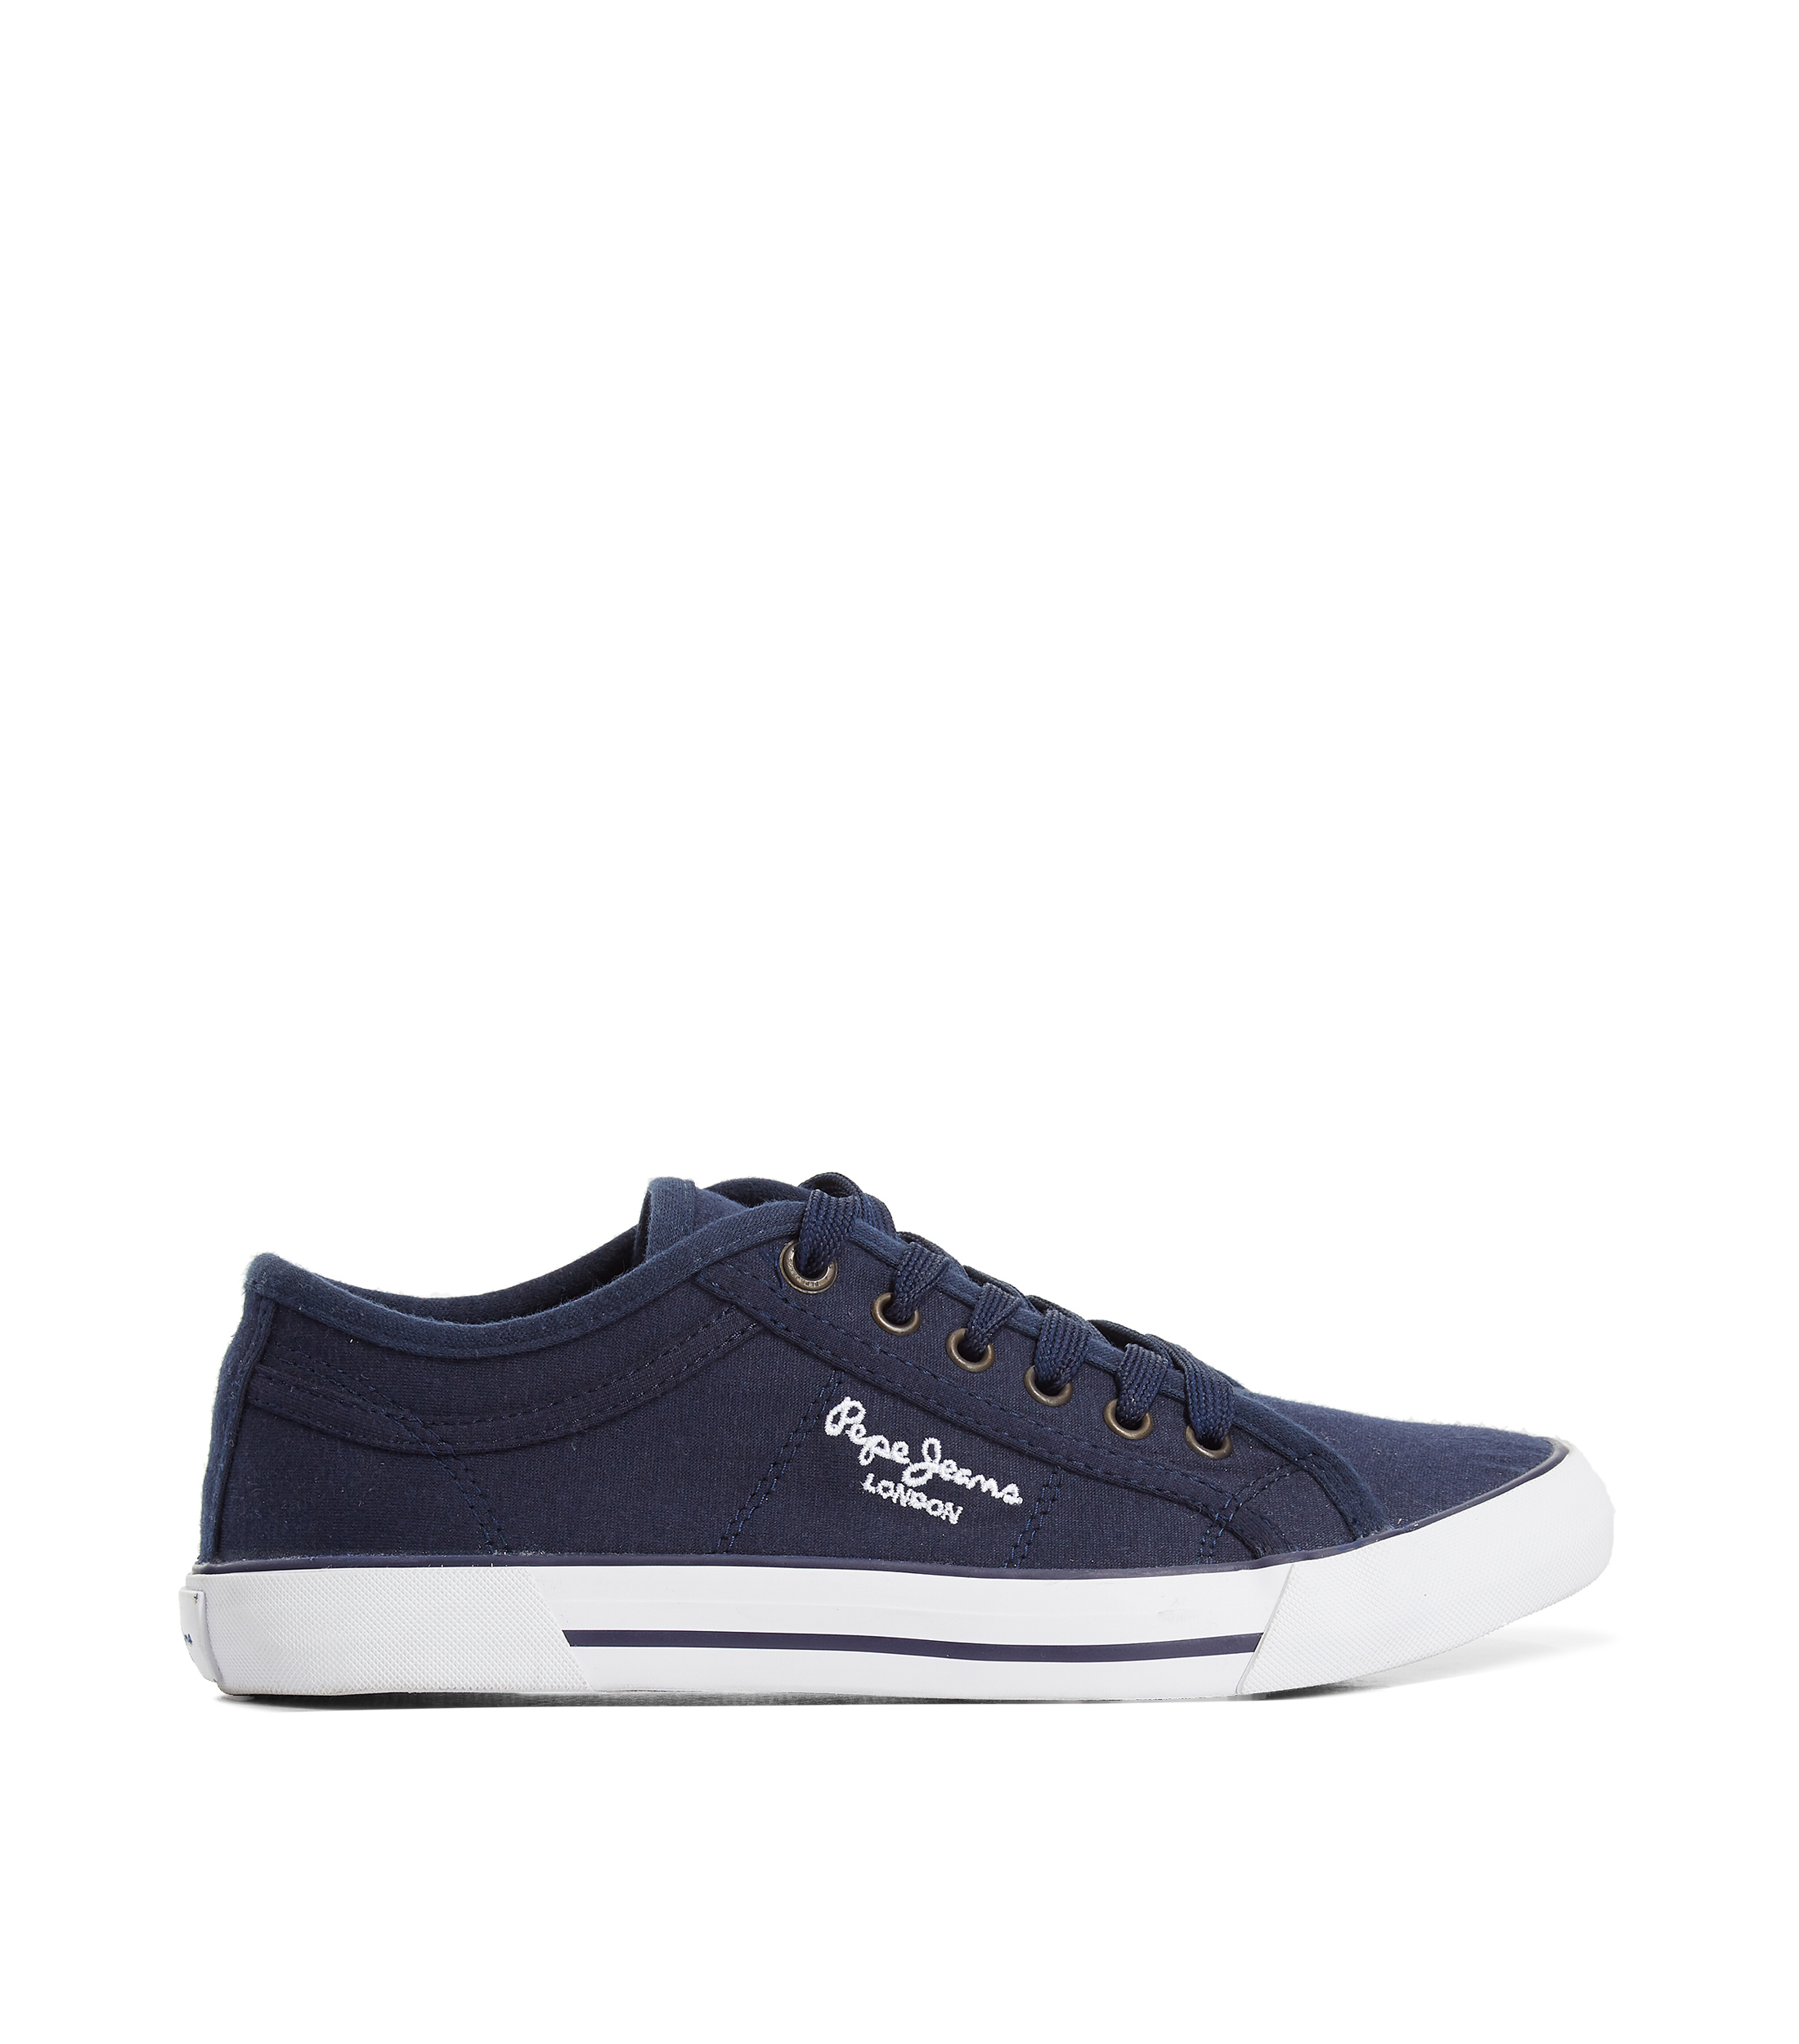 Tenis Casuales para Pepe Jeans